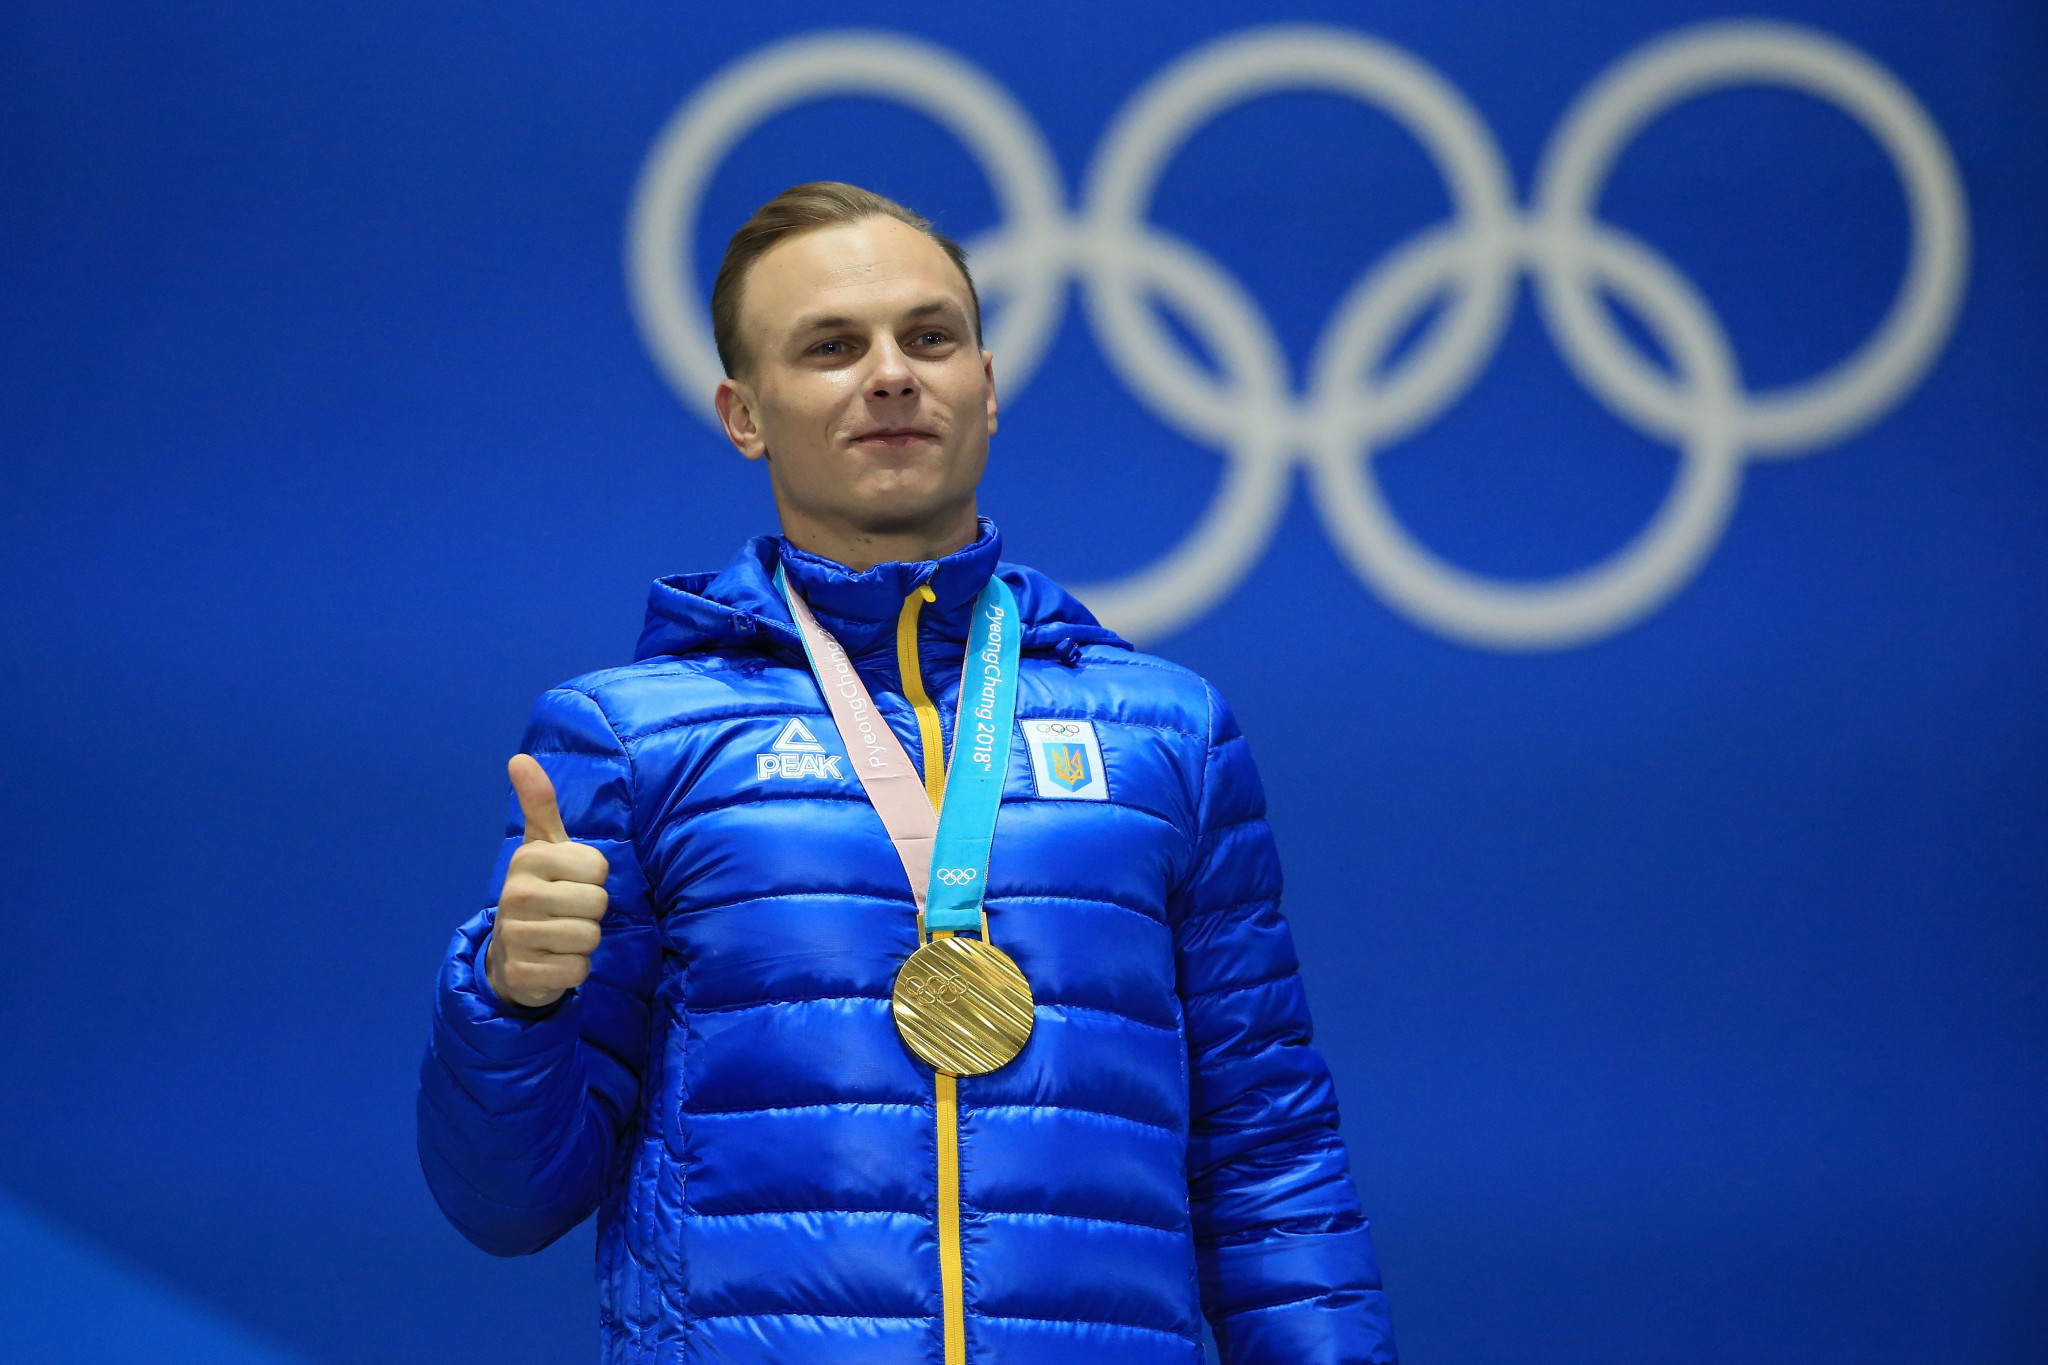 Aerials skier Oleksandr Abramenko claimed Ukraine's only Olympic gold at Pyeongchang 2018 ©Getty Images